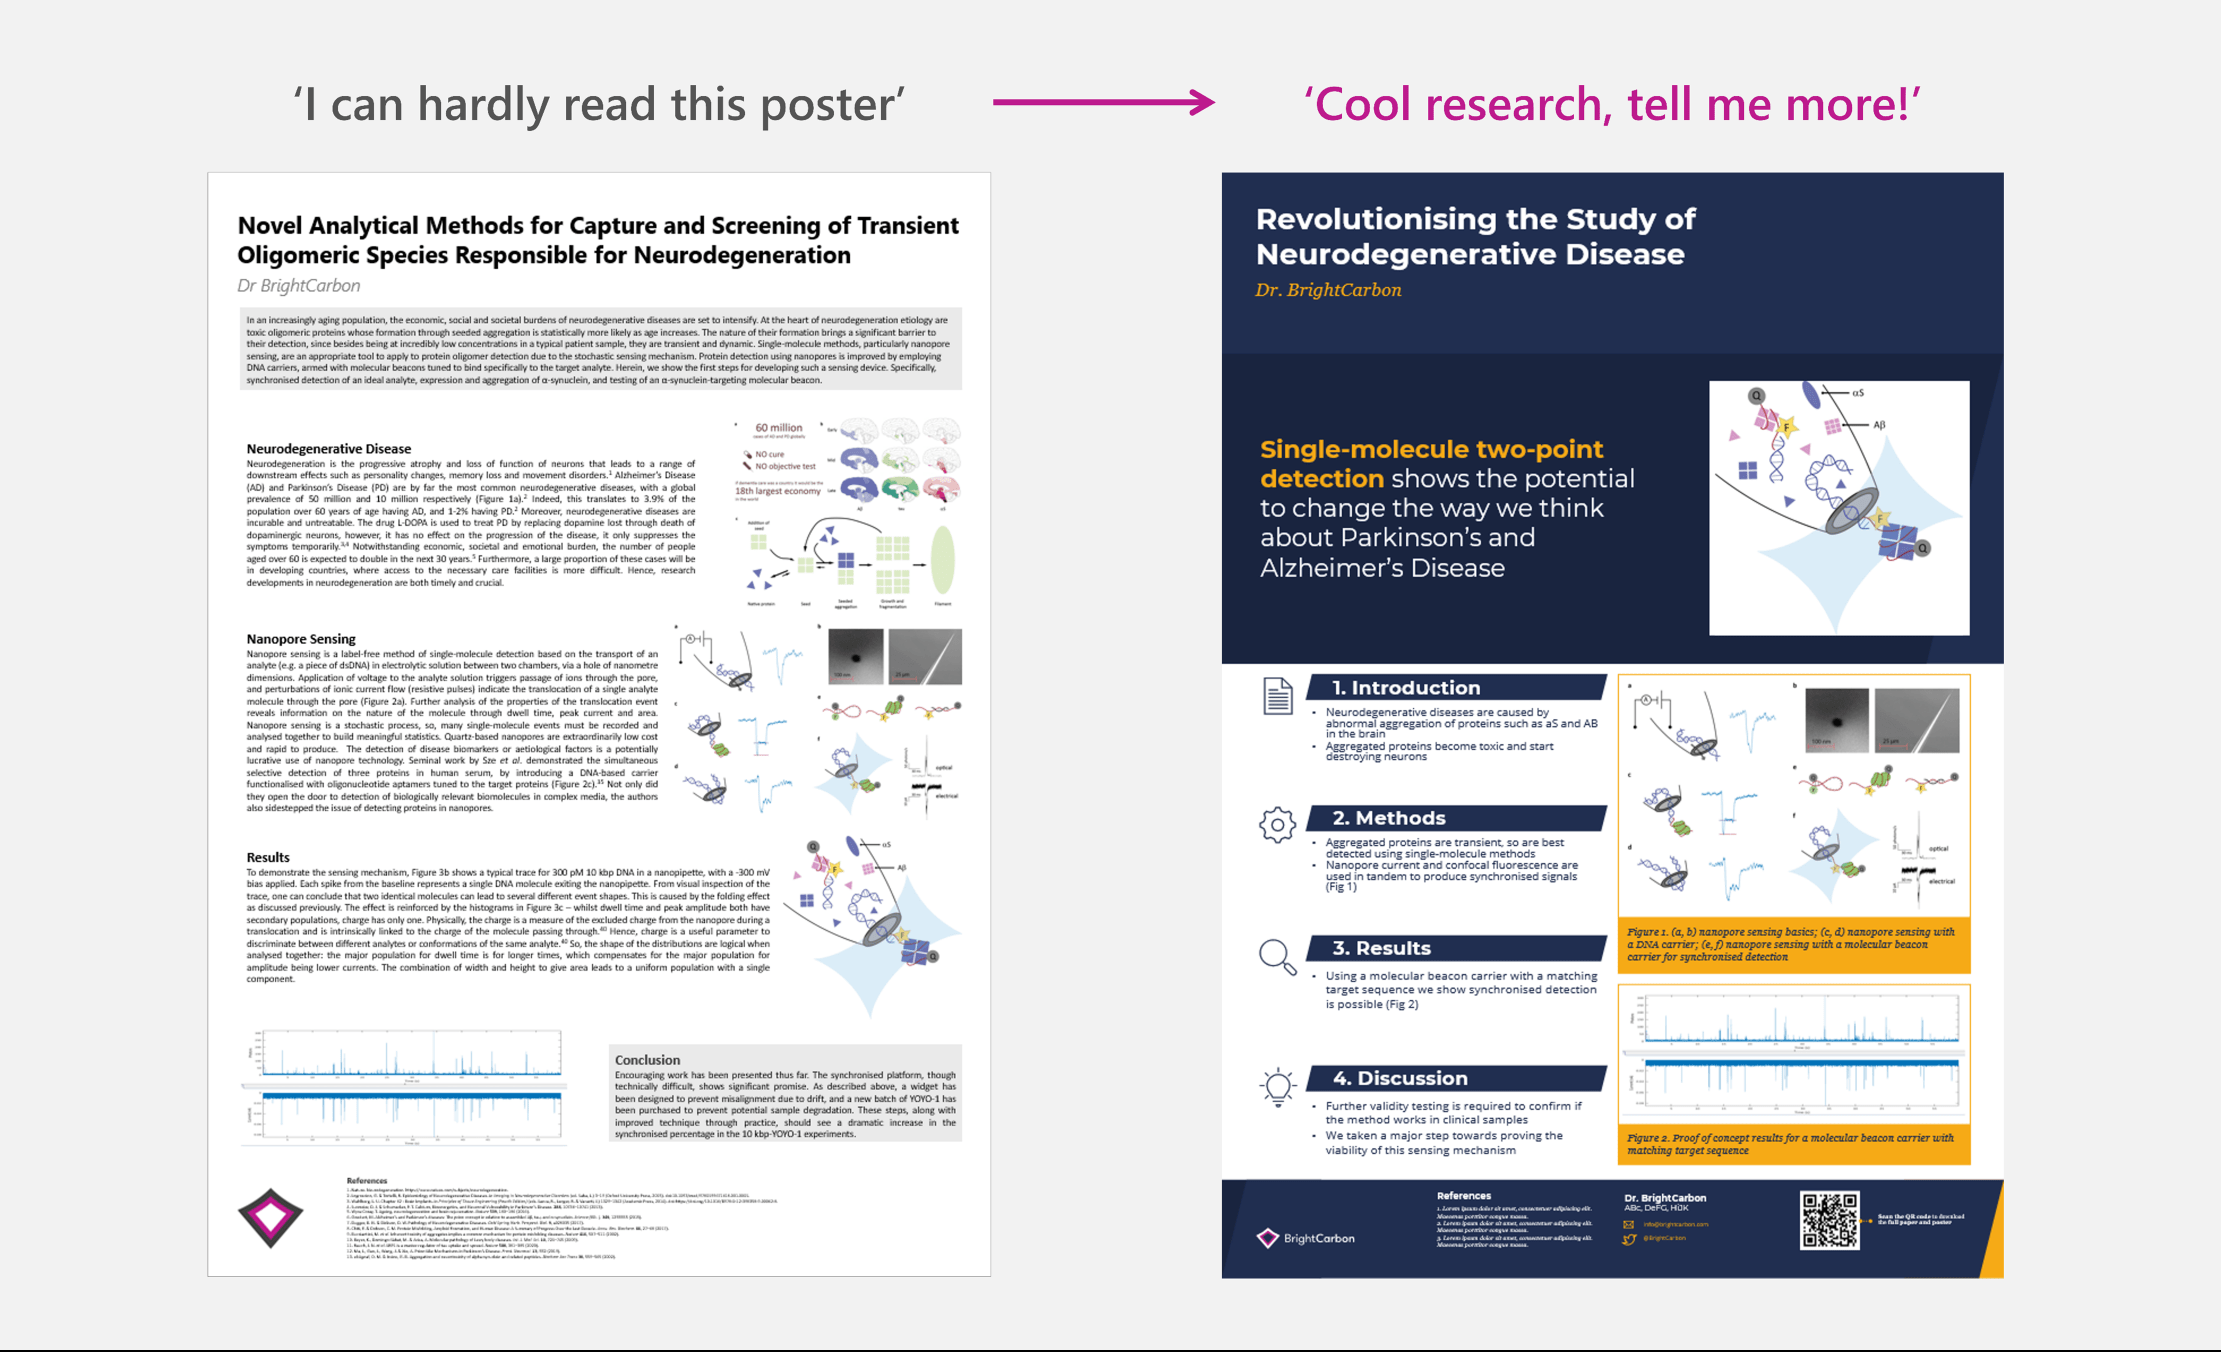 On the left of the image is a dense, text filled poster. On the right is the same poster with a face lift, less text, better visuals and more cohesive design.